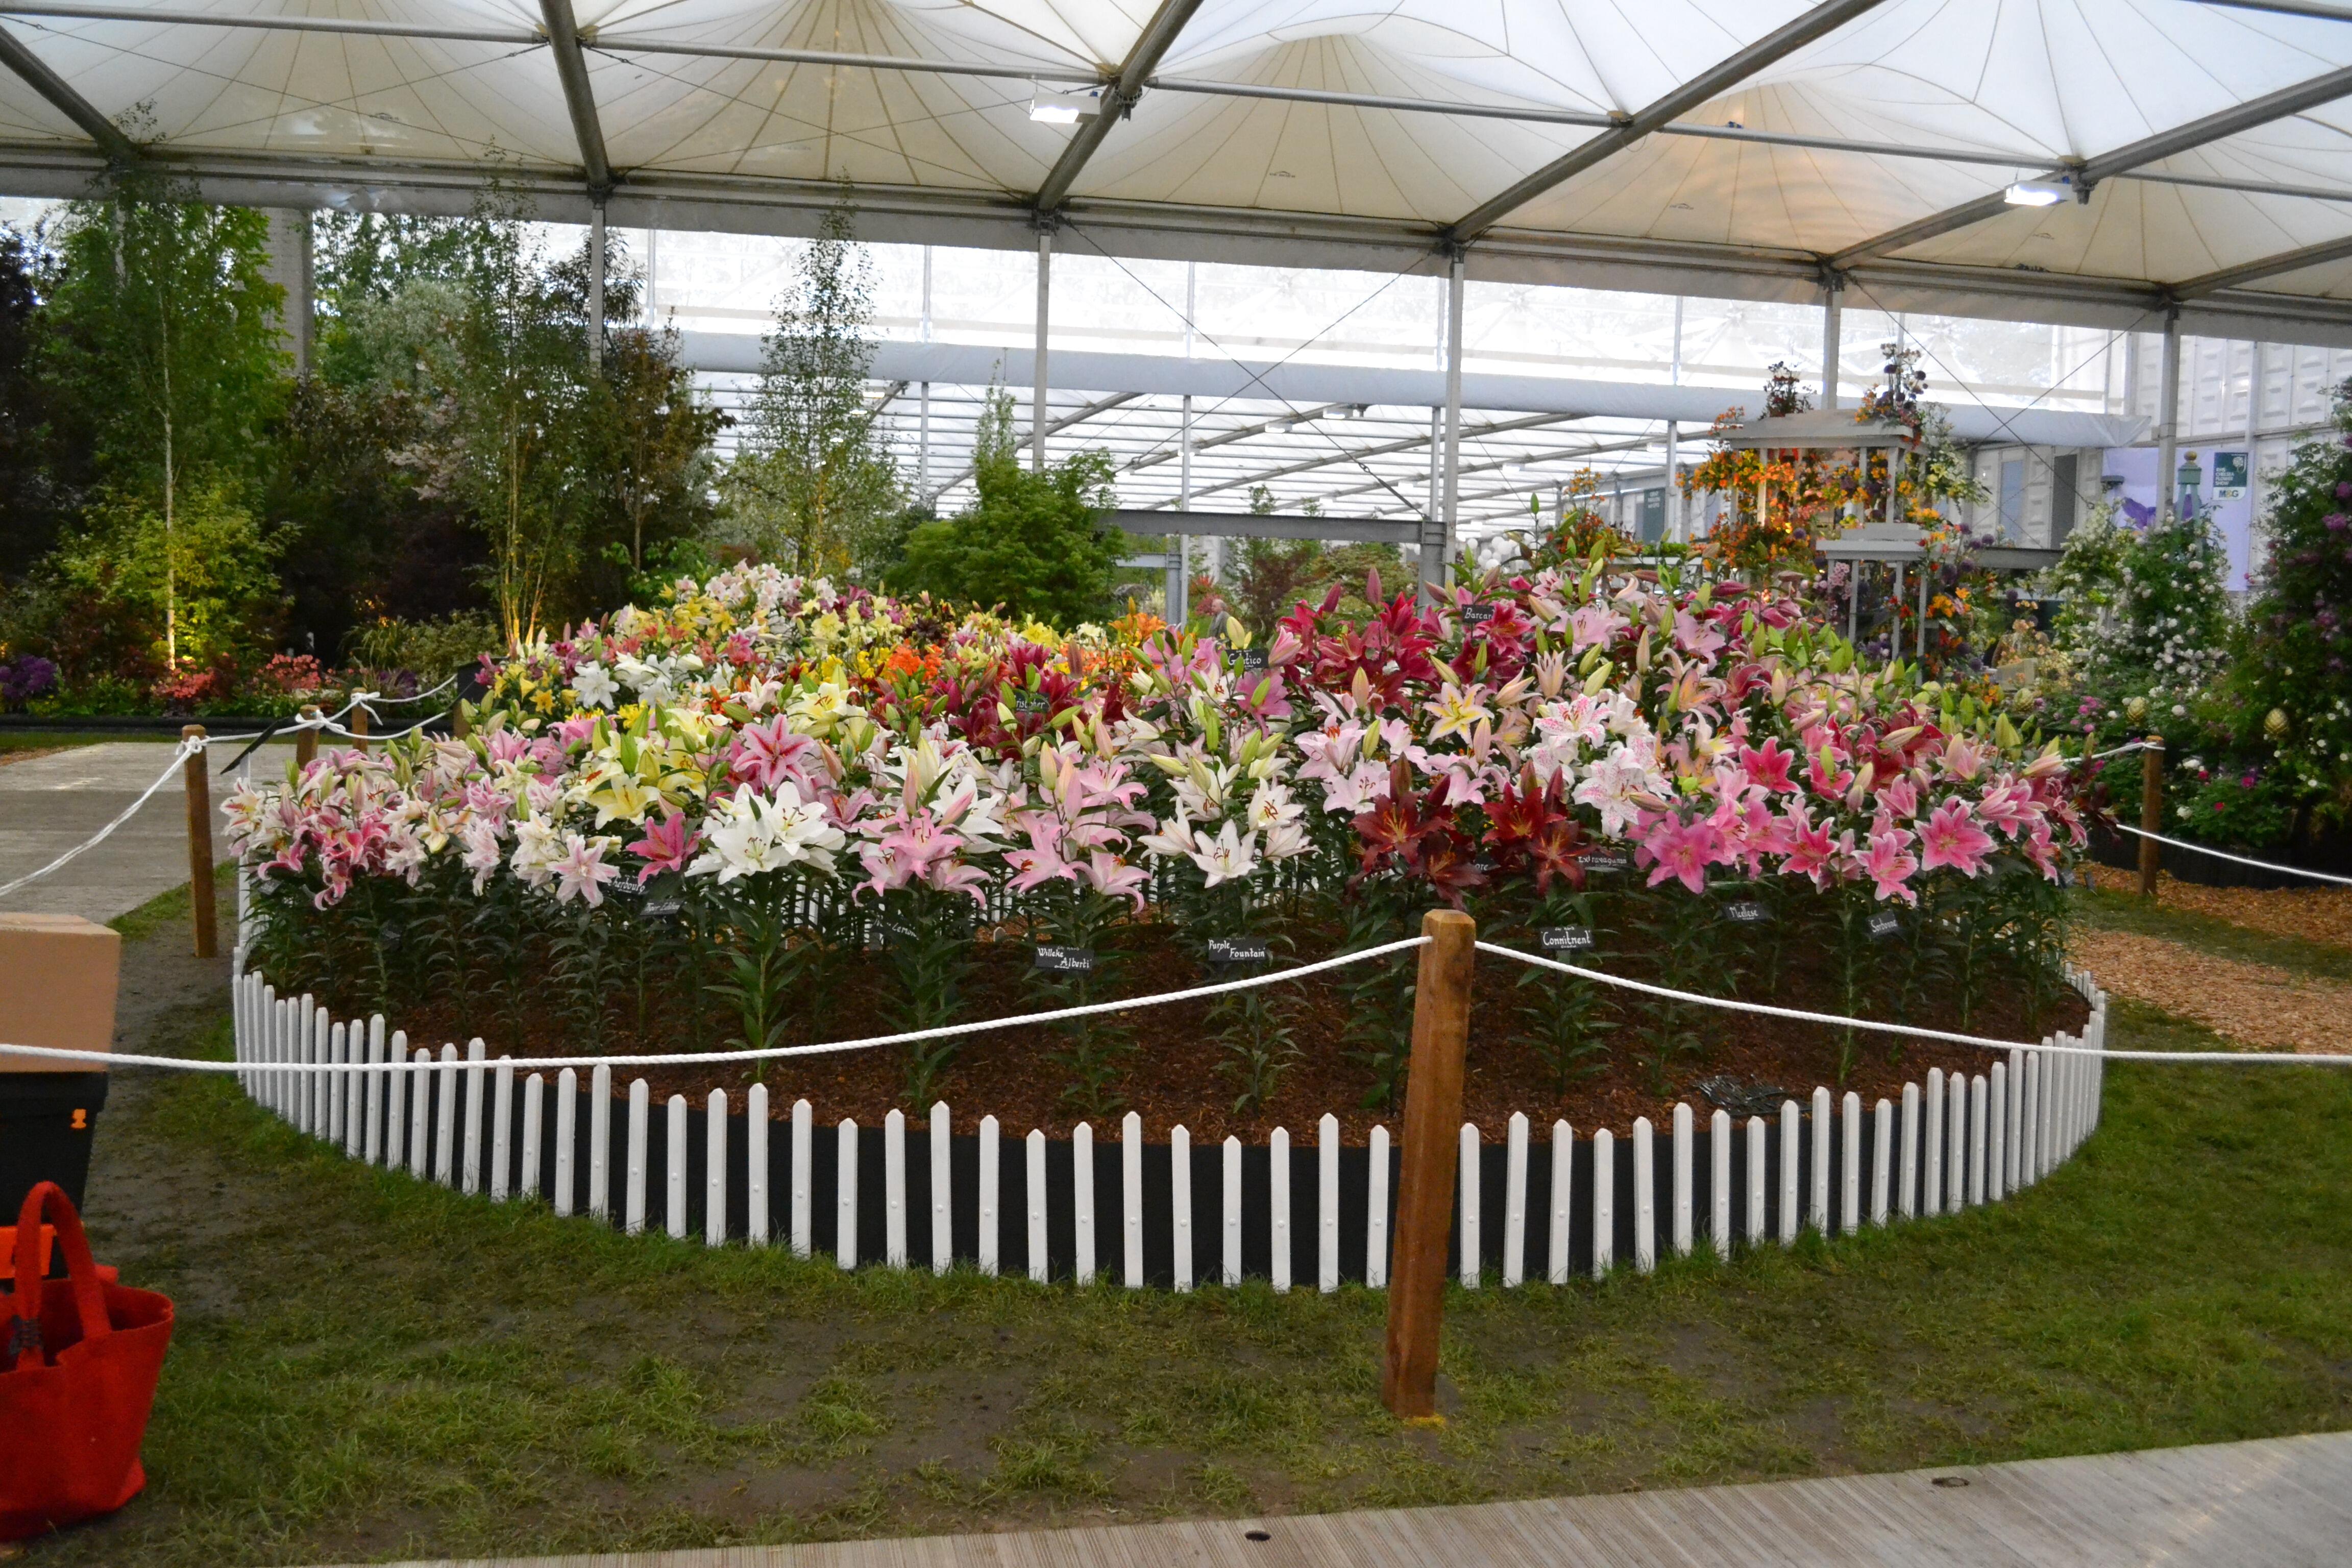 Mixed lily bed at Chelsea flower show